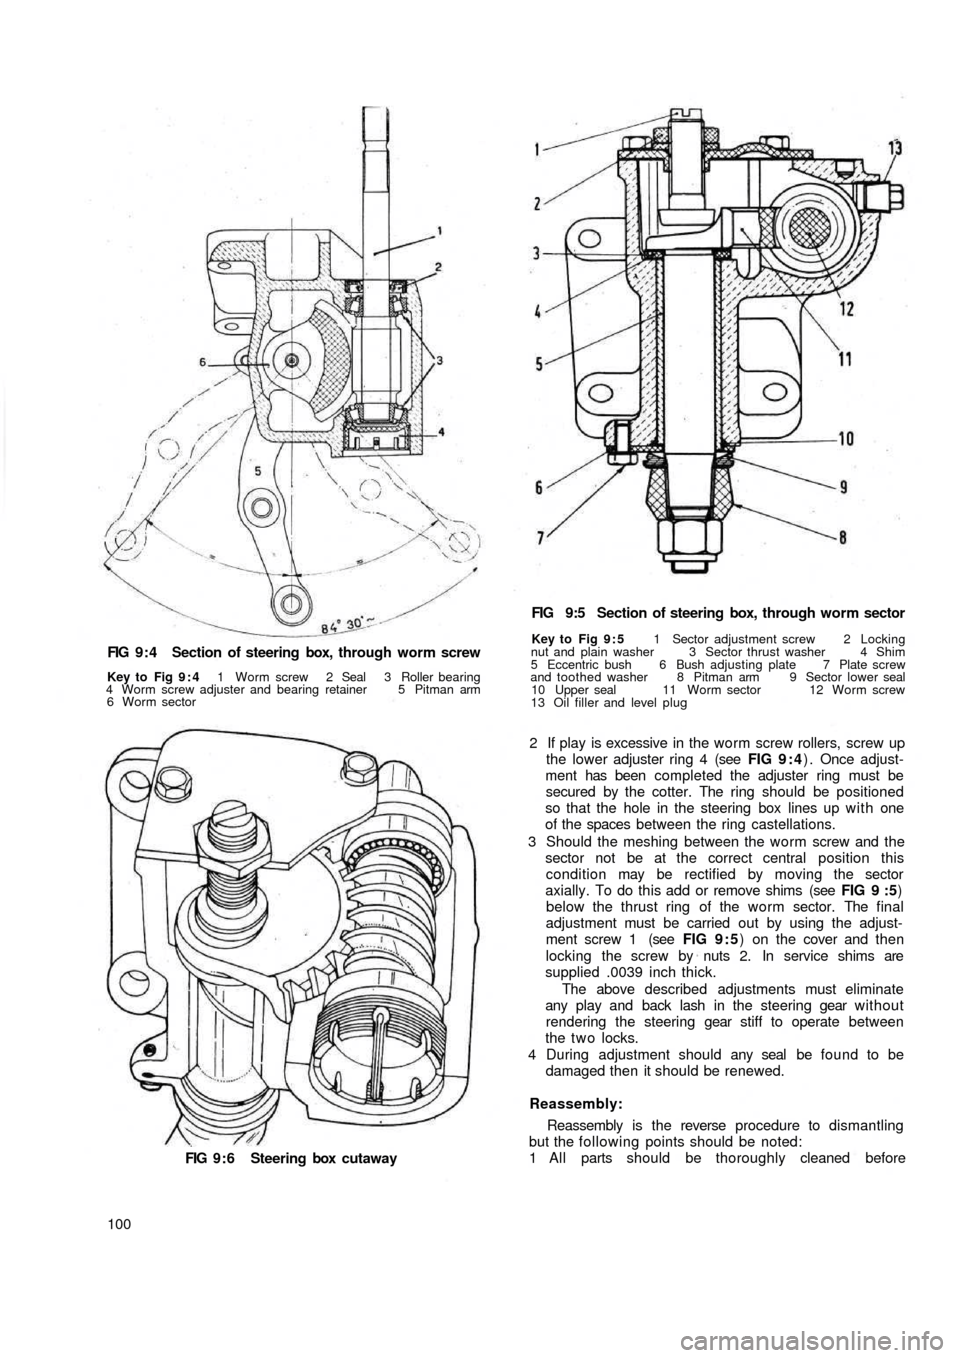 FIAT 500 1957 1.G Workshop Manual FIG 9 : 4  Section of steering box,  through worm screw
Key to  Fig 9 : 4 1 Worm screw 2 Seal 3 Roller bearing
4 Worm screw adjuster and bearing retainer 5 Pitman arm
6 Worm sector
FIG 9 : 6  Steering